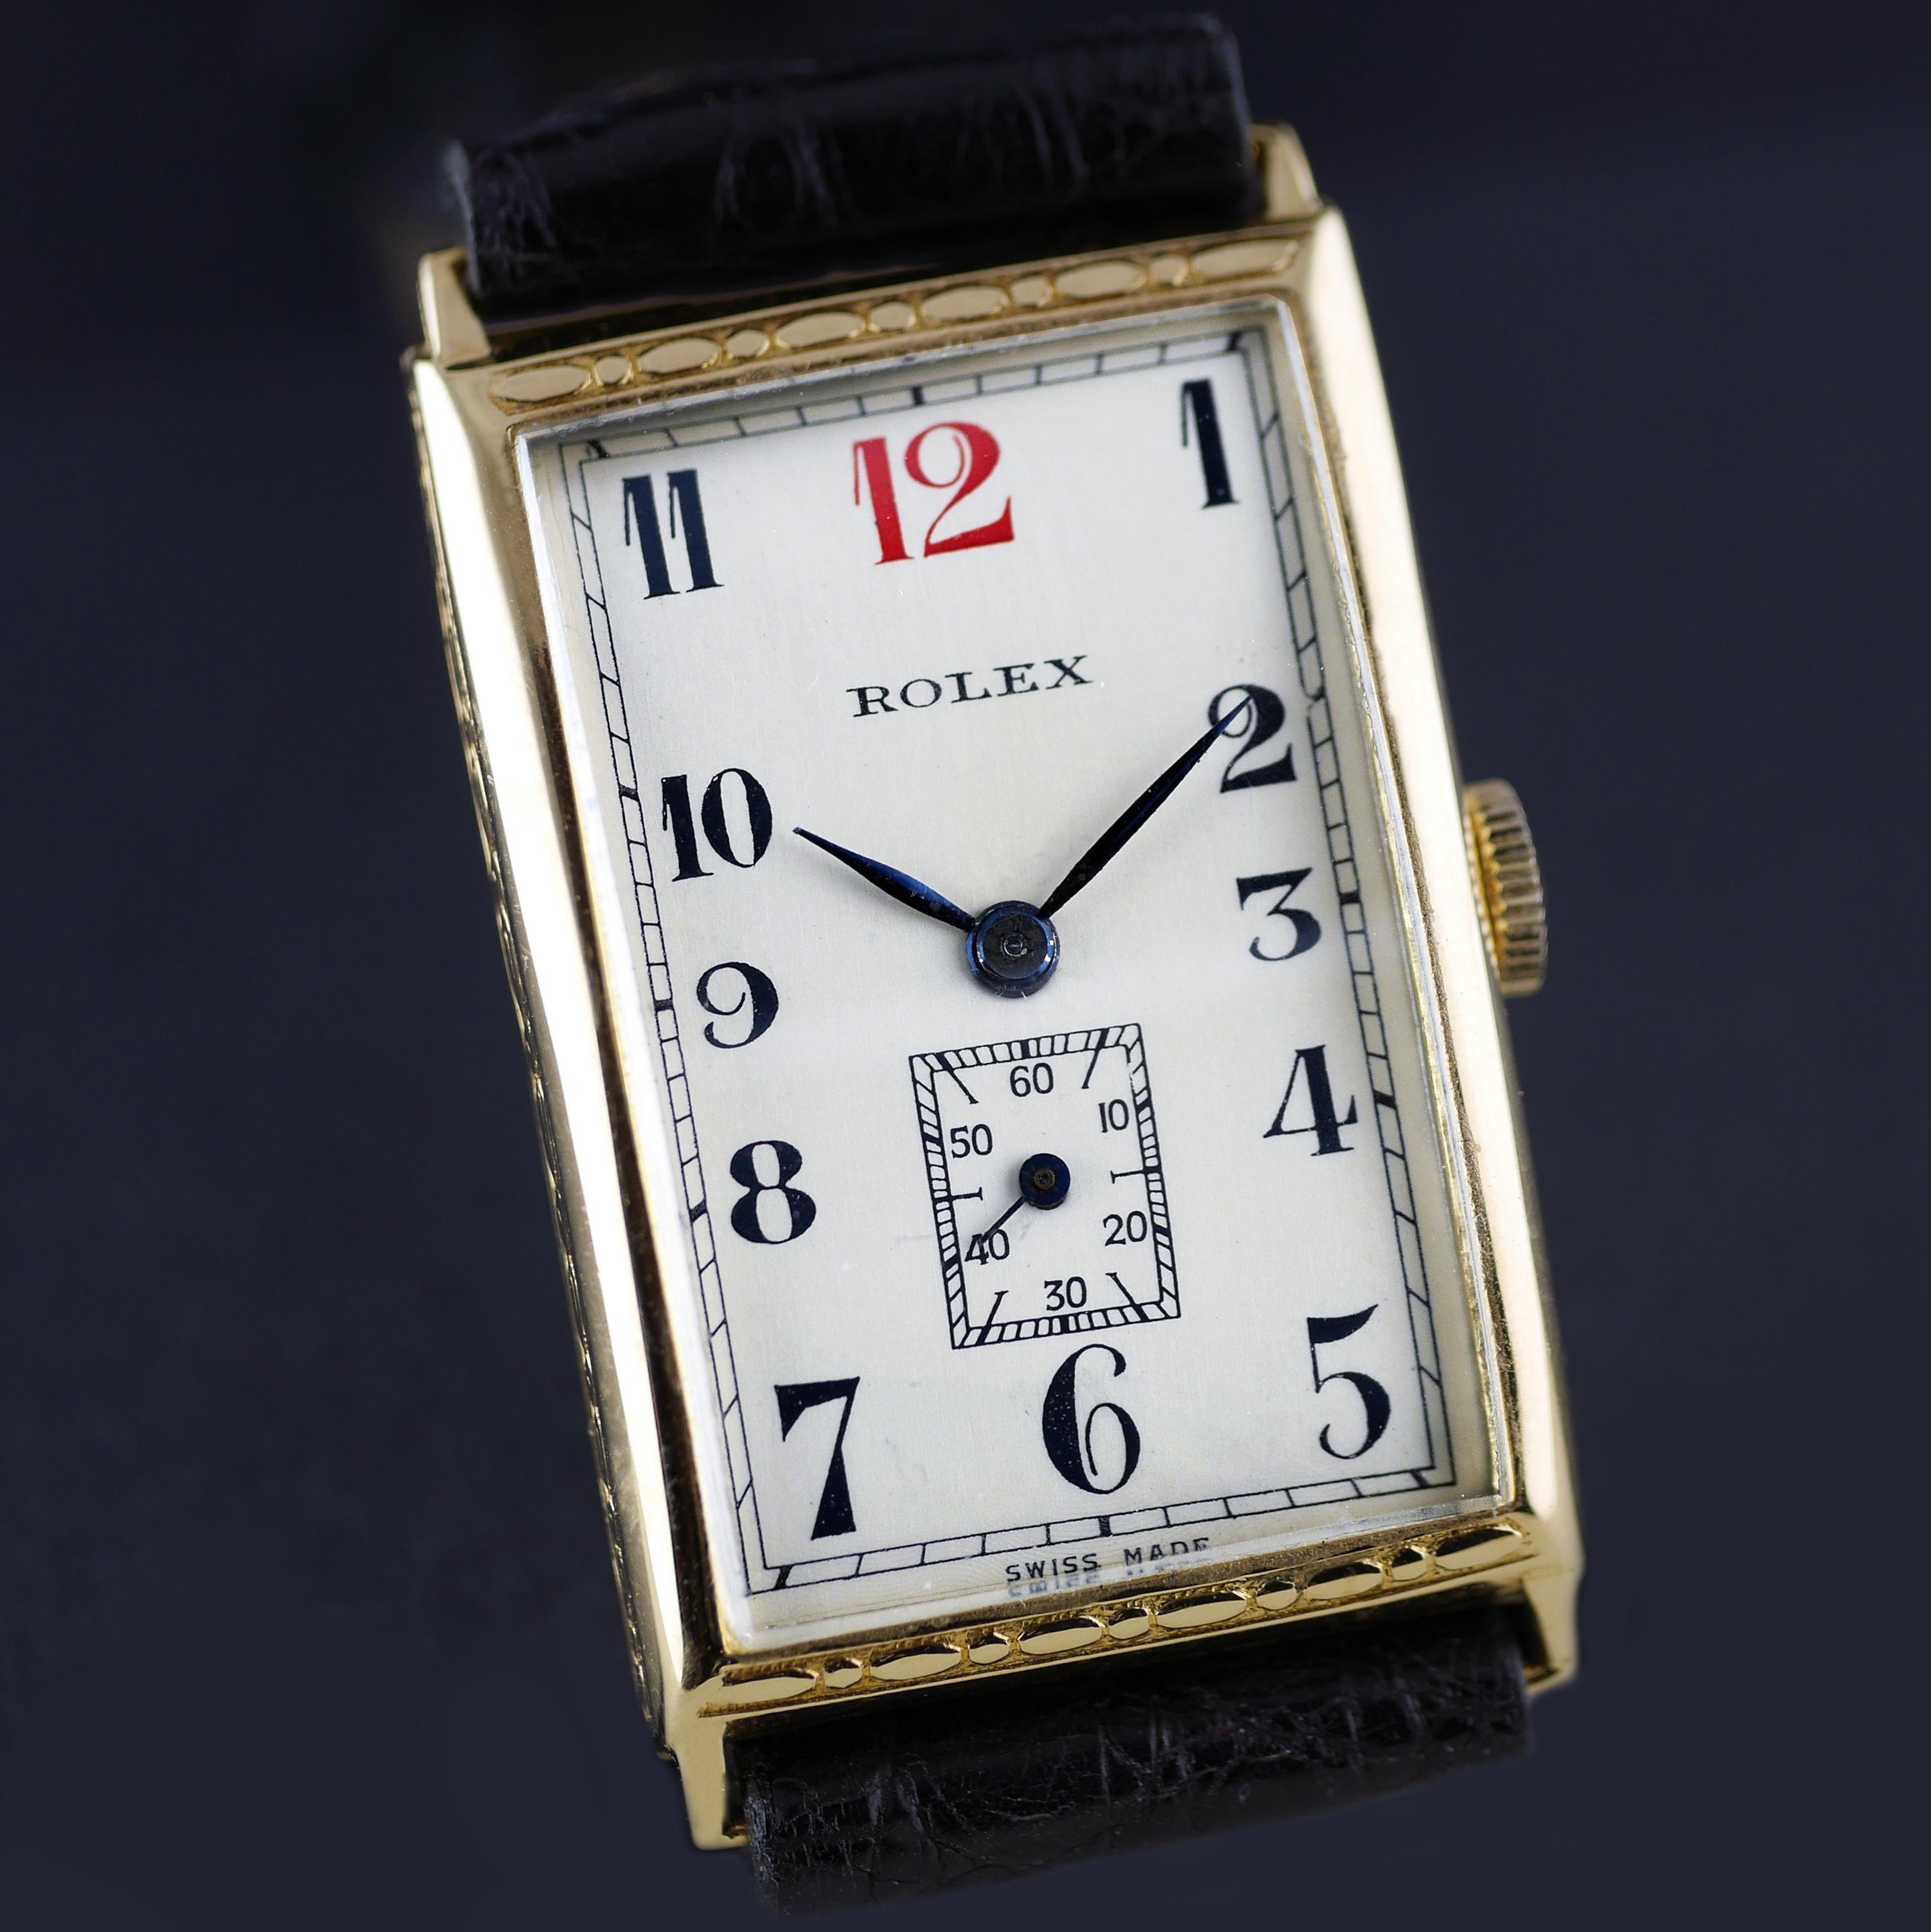 An Art Deco vintage wristwatch by Rolex dated 1927. This unusual and rare rectangular shaped Rolex wristwatch, with a distinctive red 12 and hand chased (engraved) case detailing, was made in the height of the Art Deco era. This is a very high grade